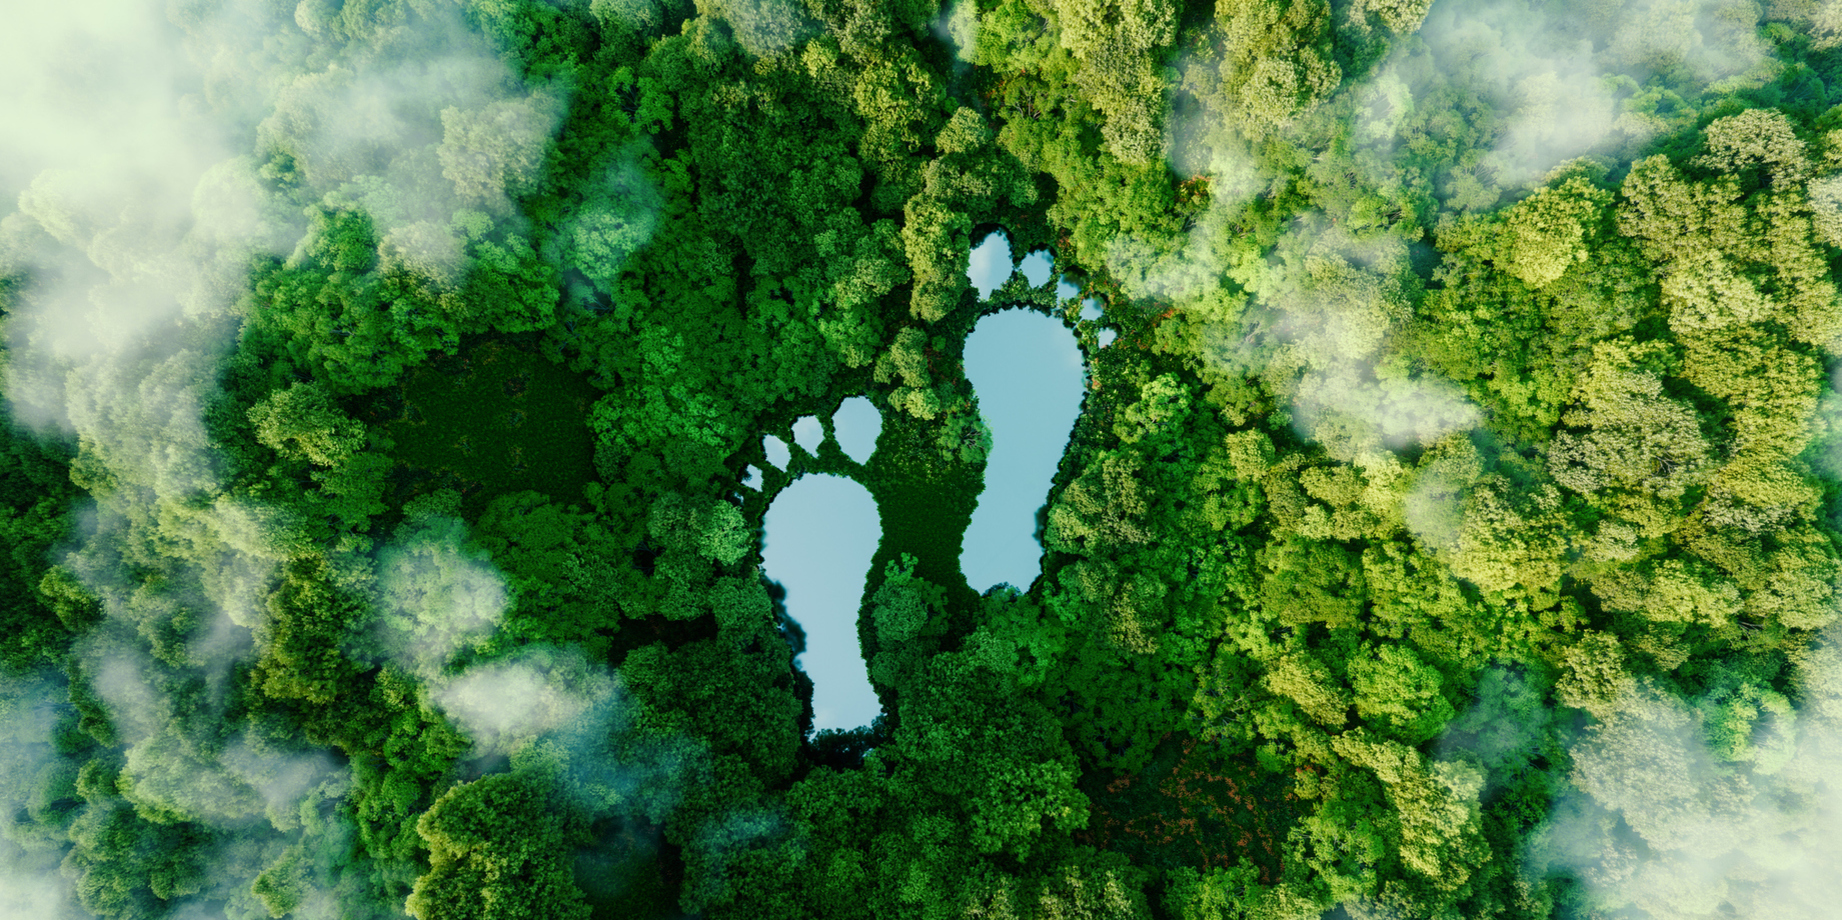 Birdseye view of a forest with human footprints to show the impact humans have on nature